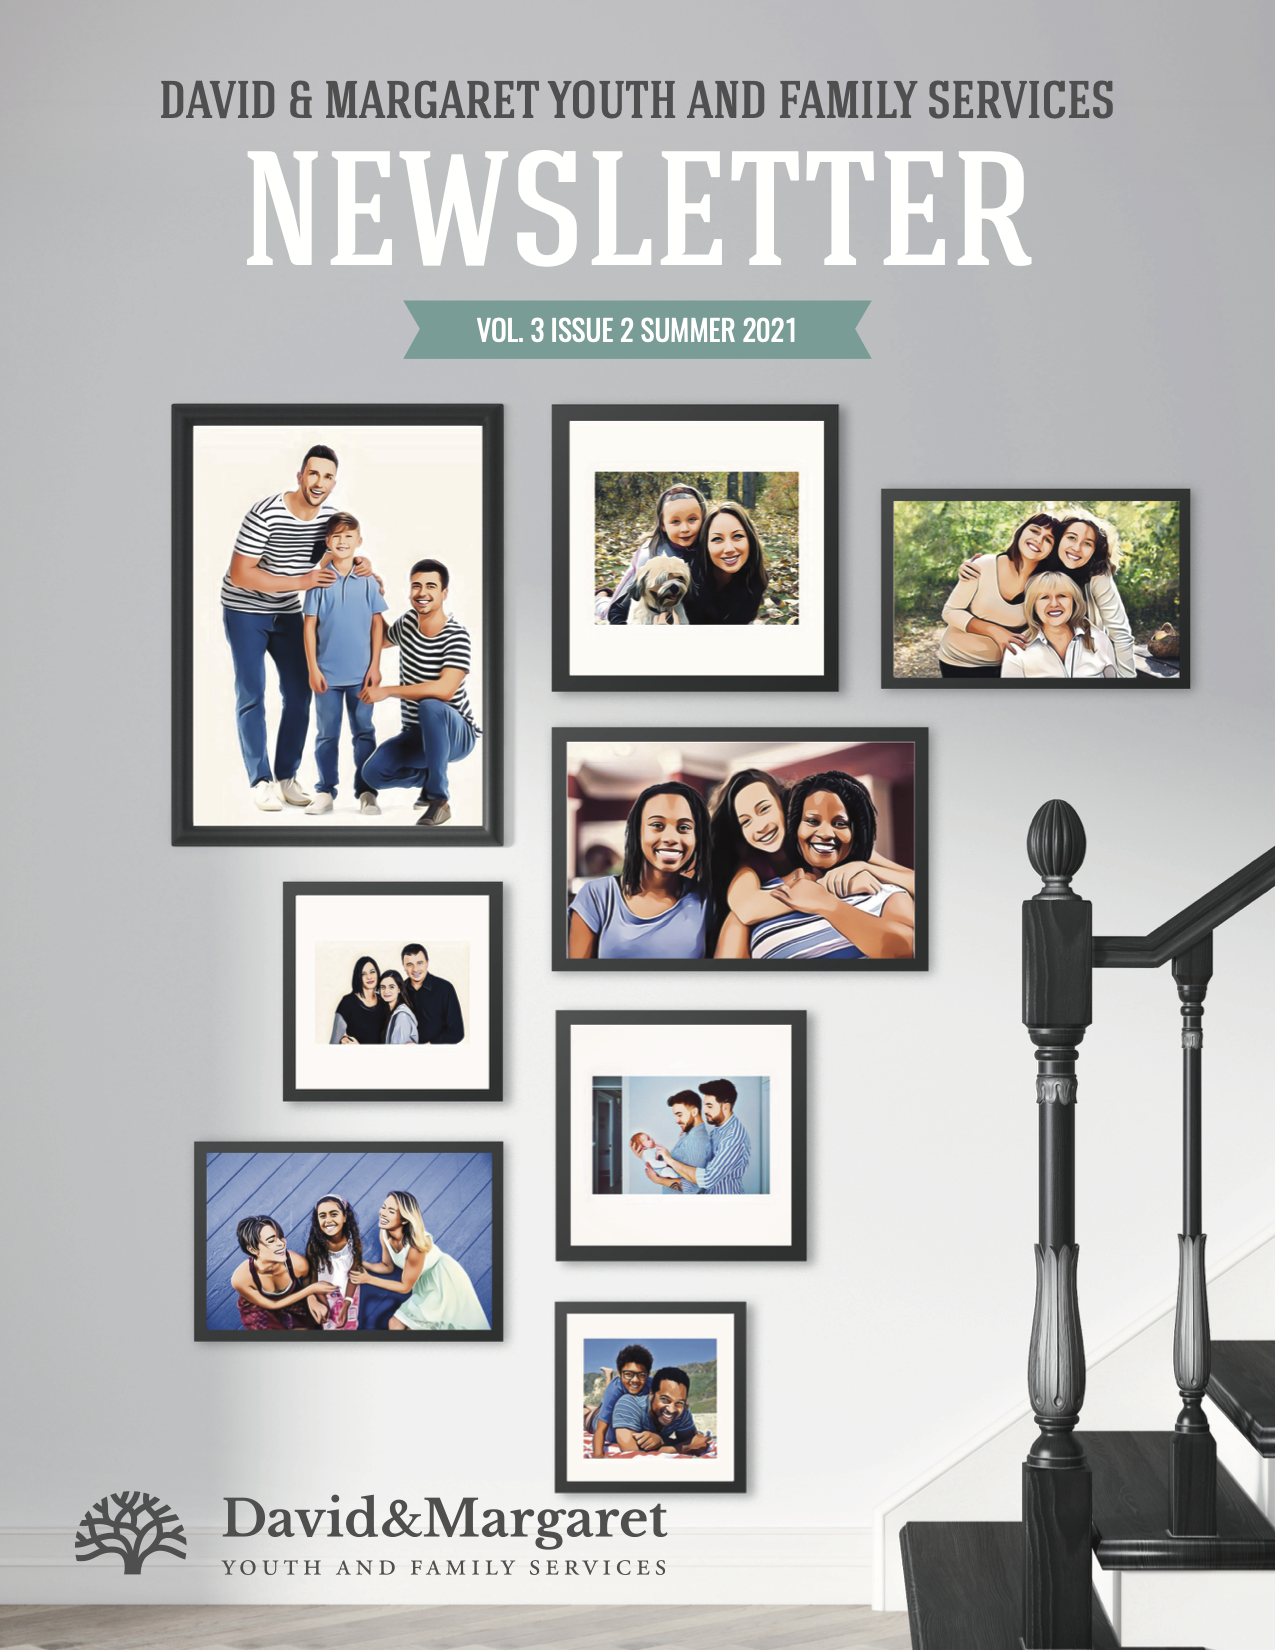 David & Margaret Quarterly Newsletter Vol. 3 Issue 2; Foster Care and Adoption Agency